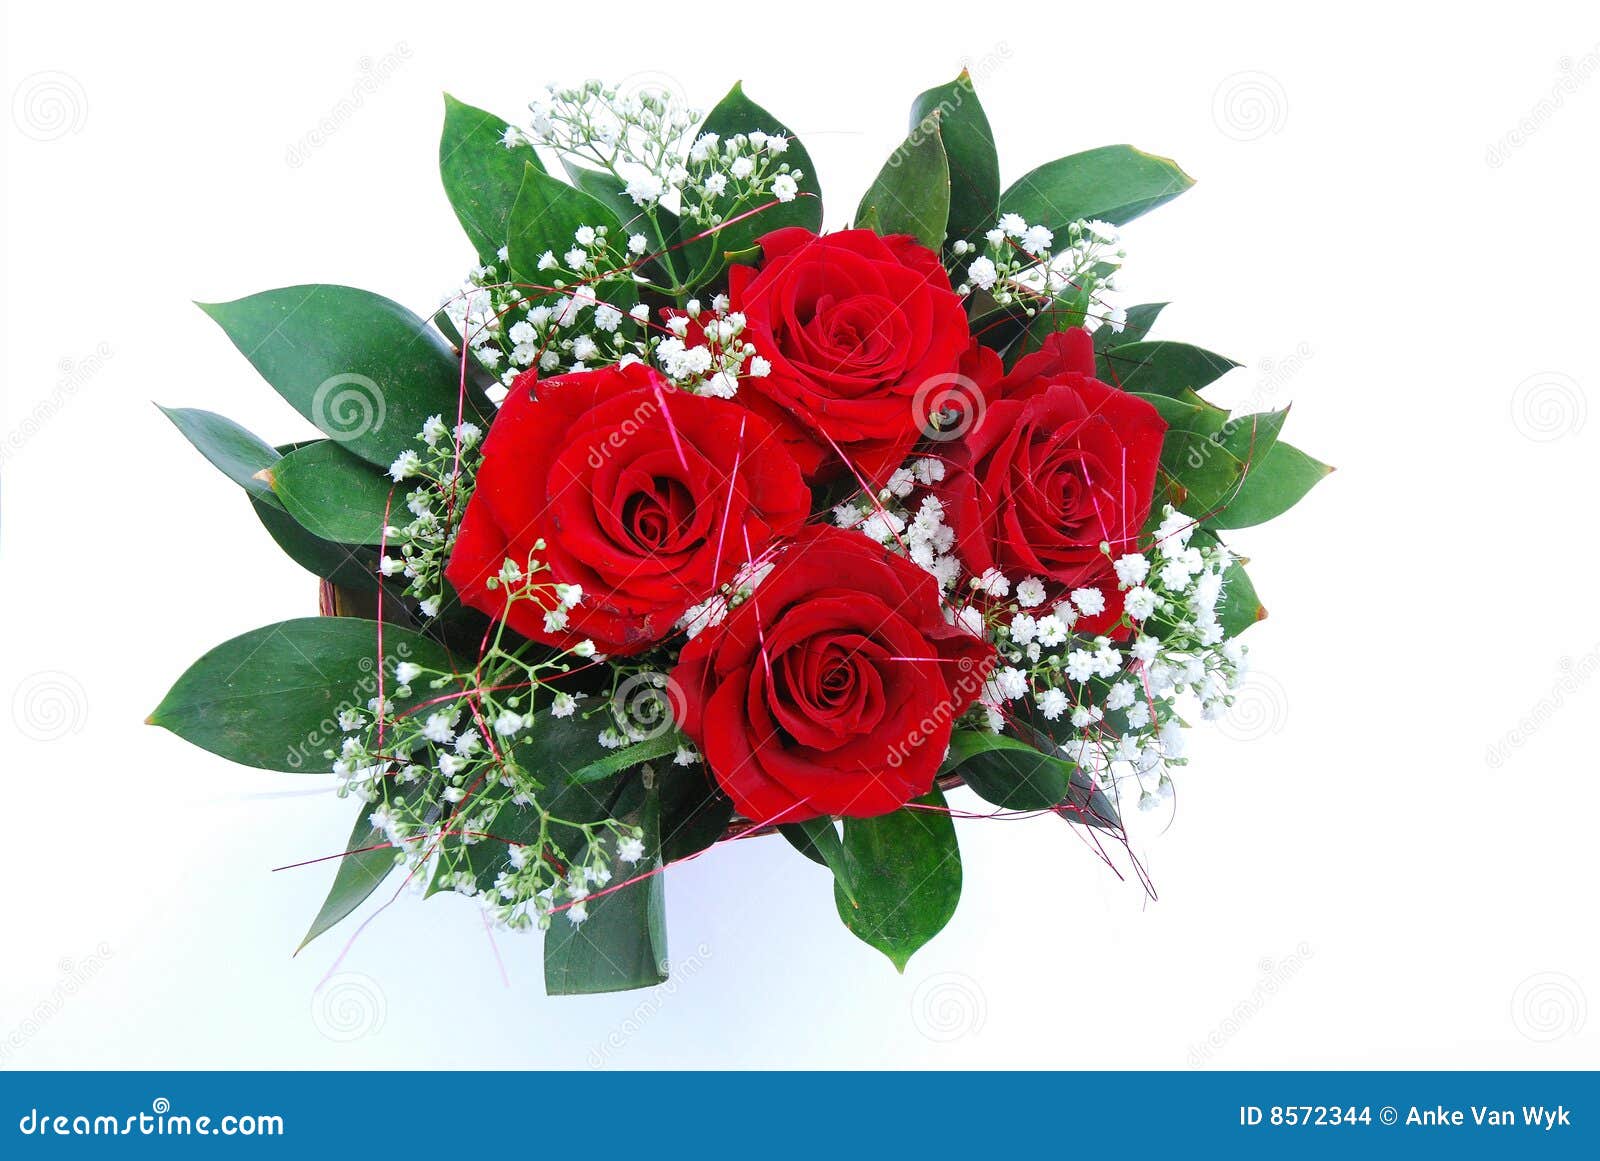 bunch red roses